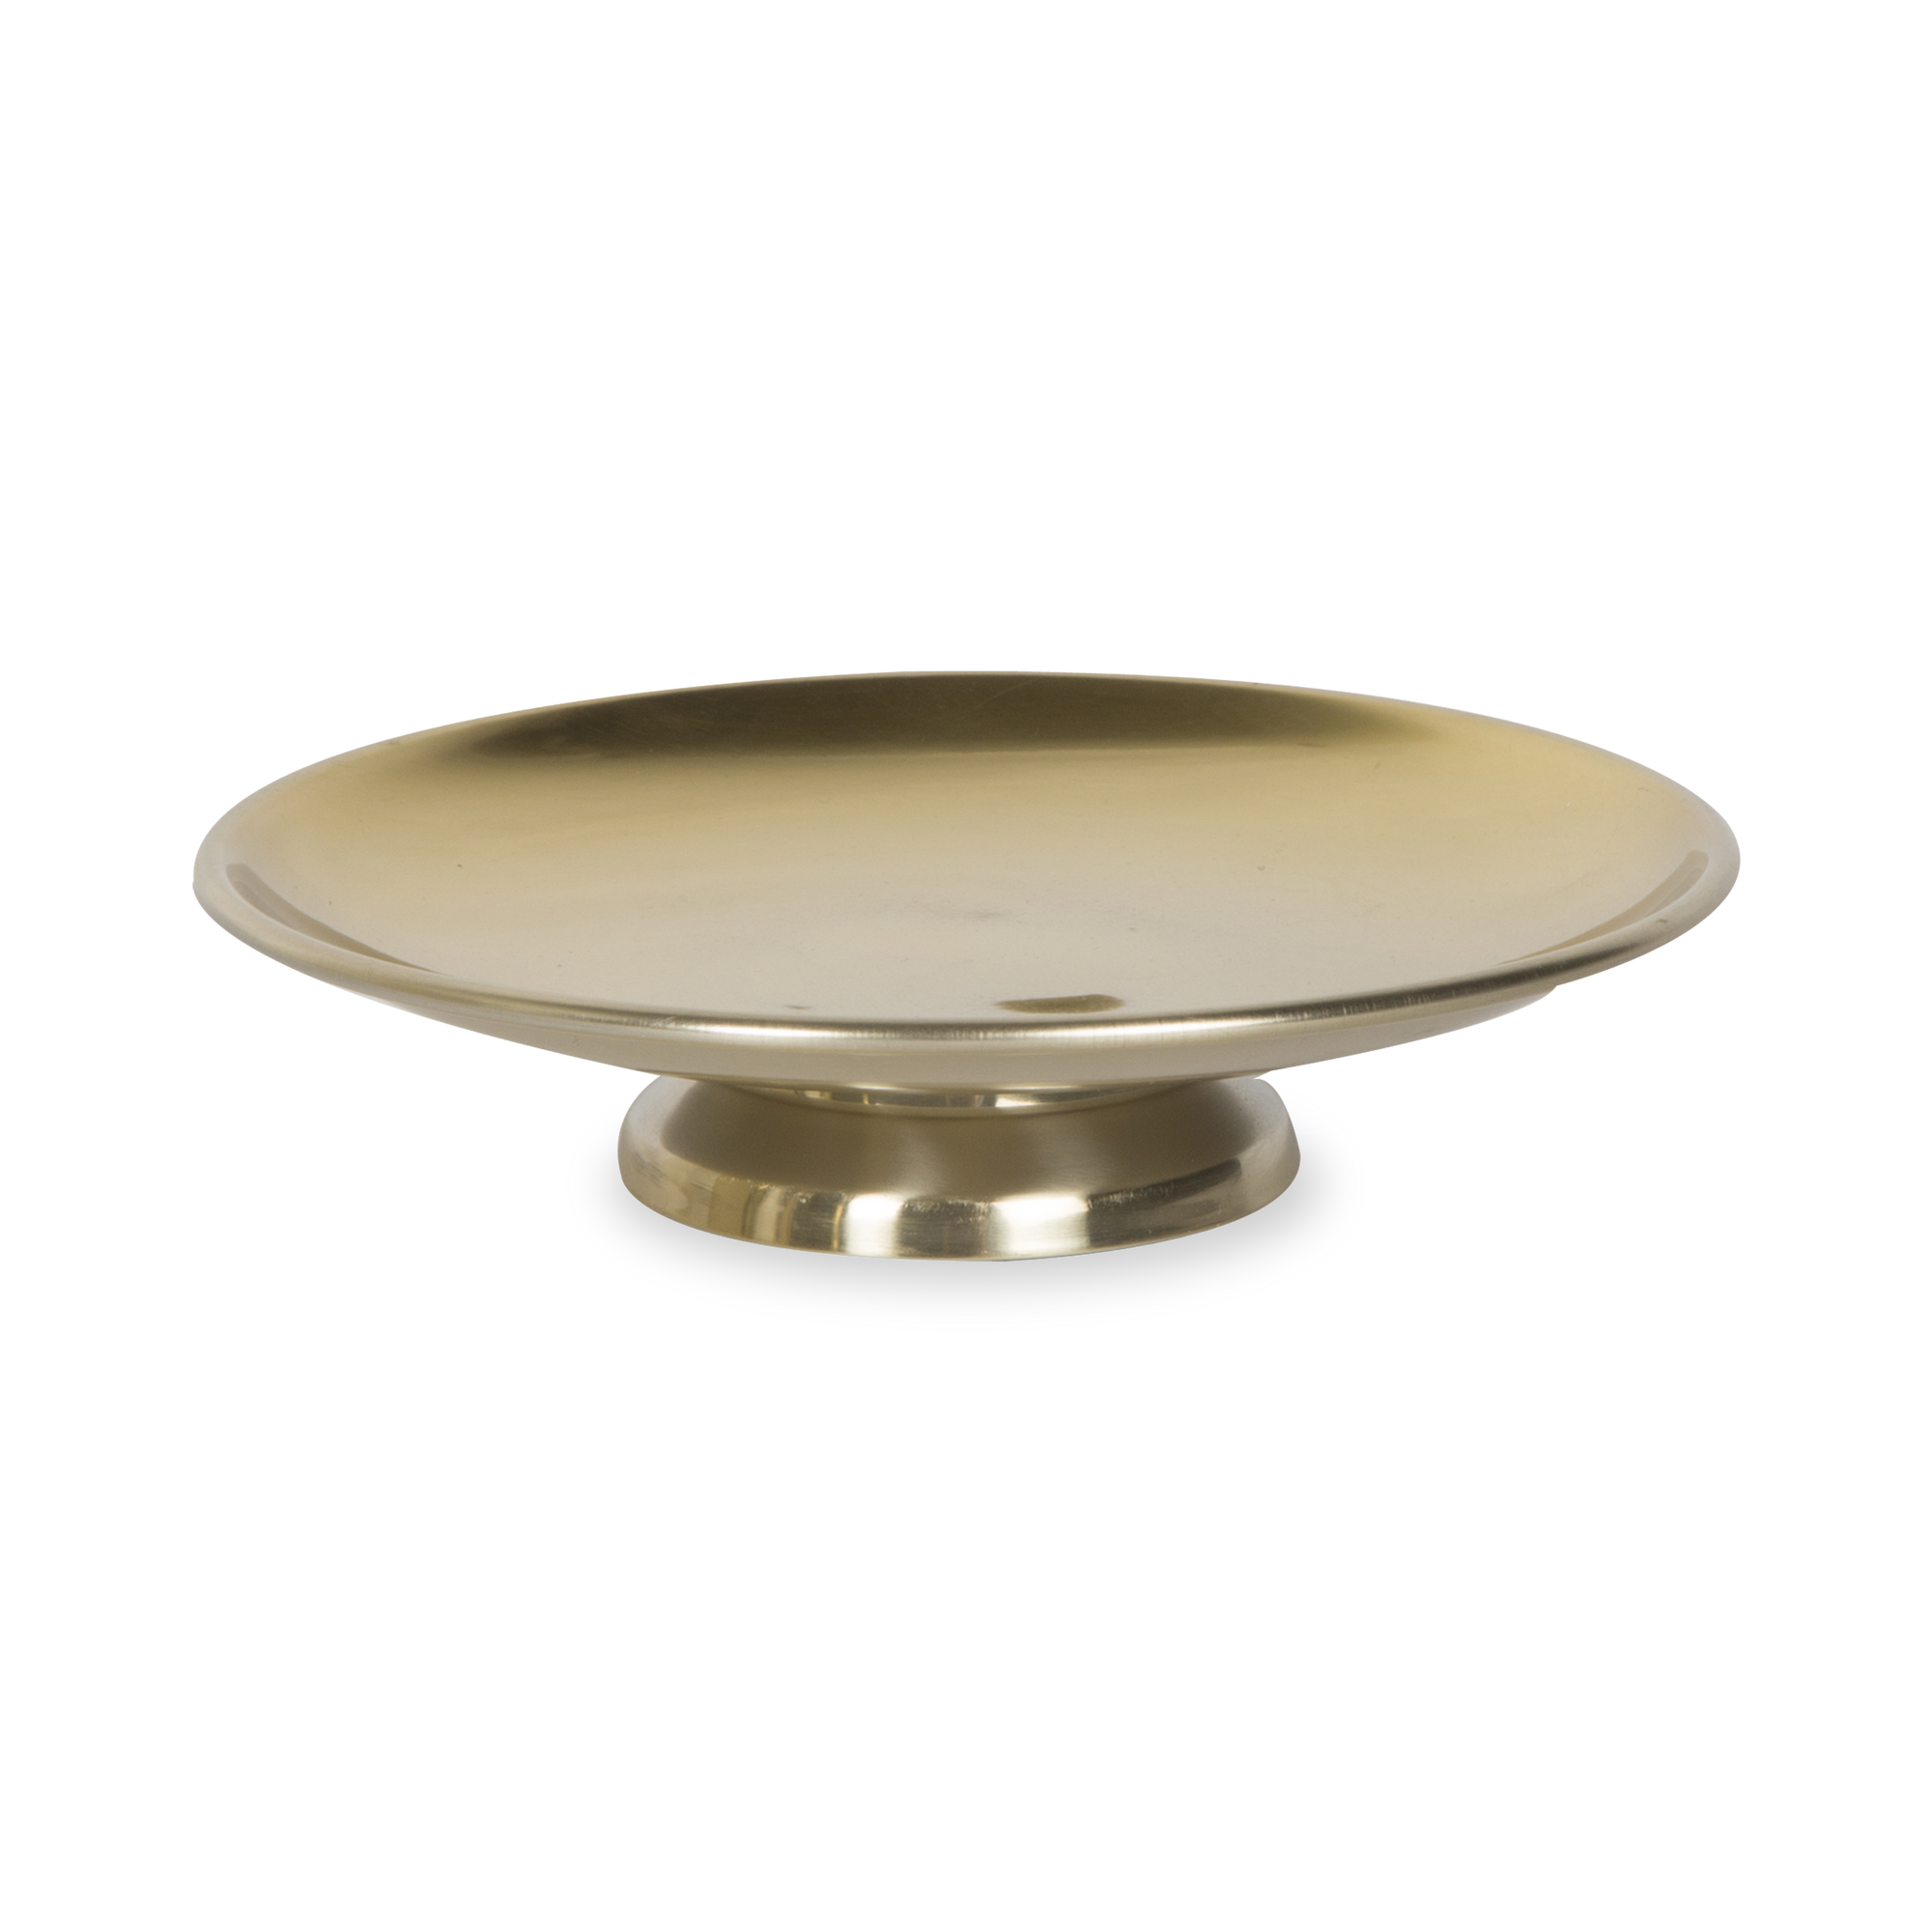 Cast of thickly plated stainless steel with brass finish, the Arlington collection features clean lines with an elegantly pleated detail.